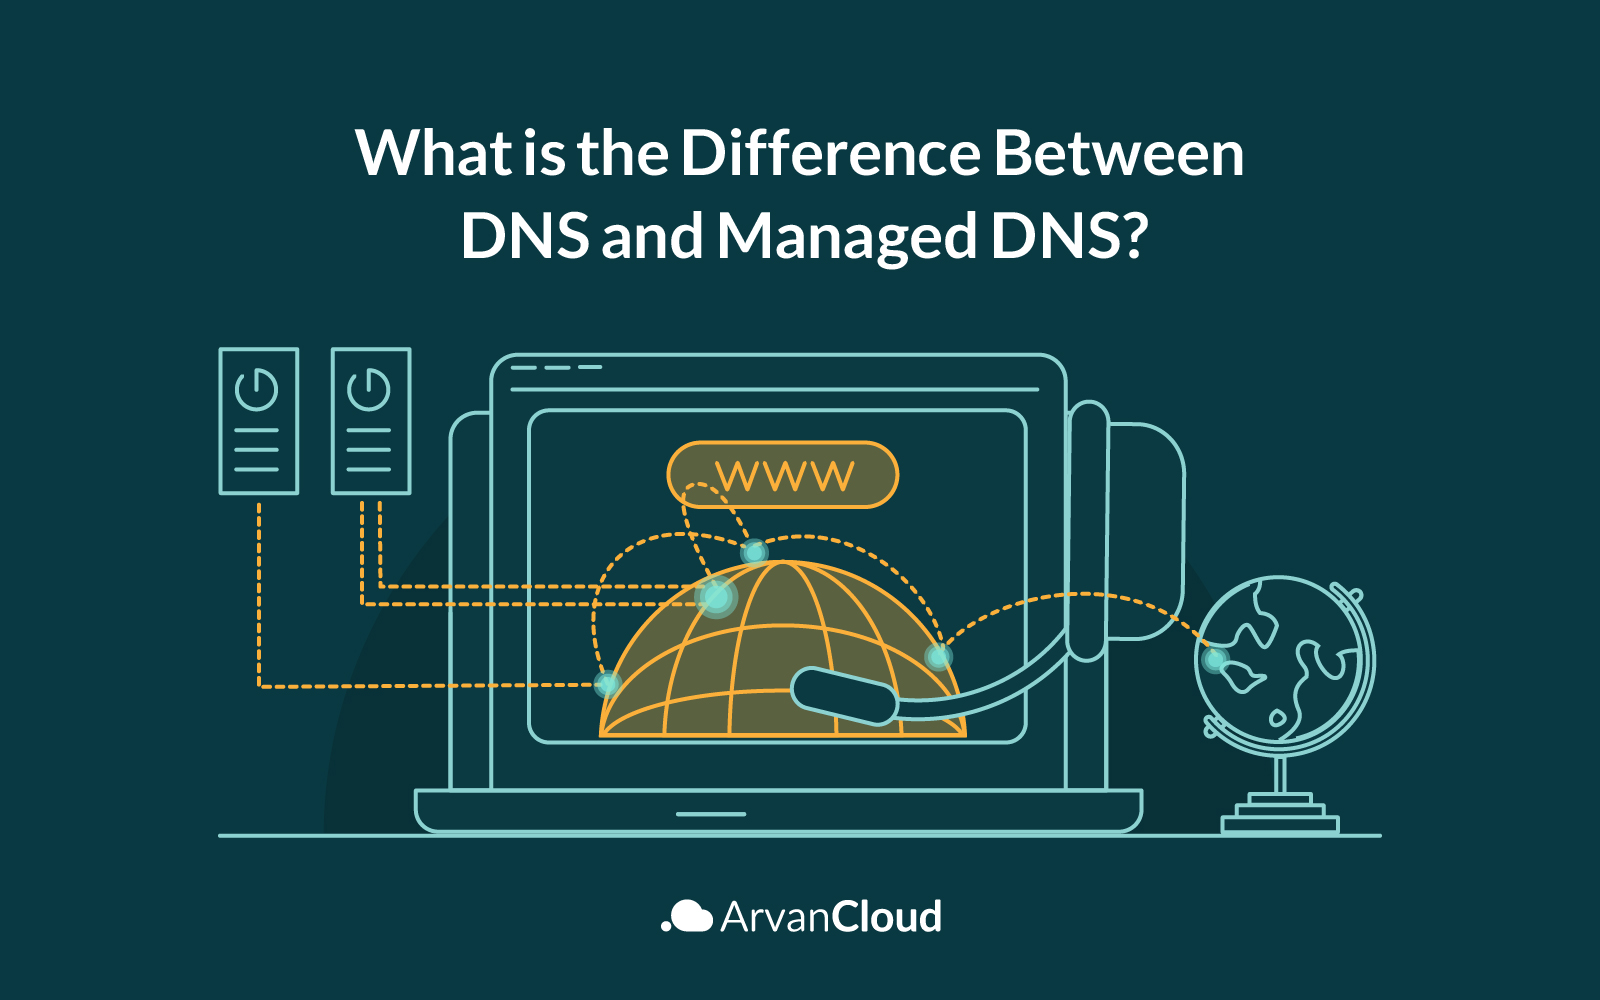 What Is the Difference Between DNS and Managed DNS?